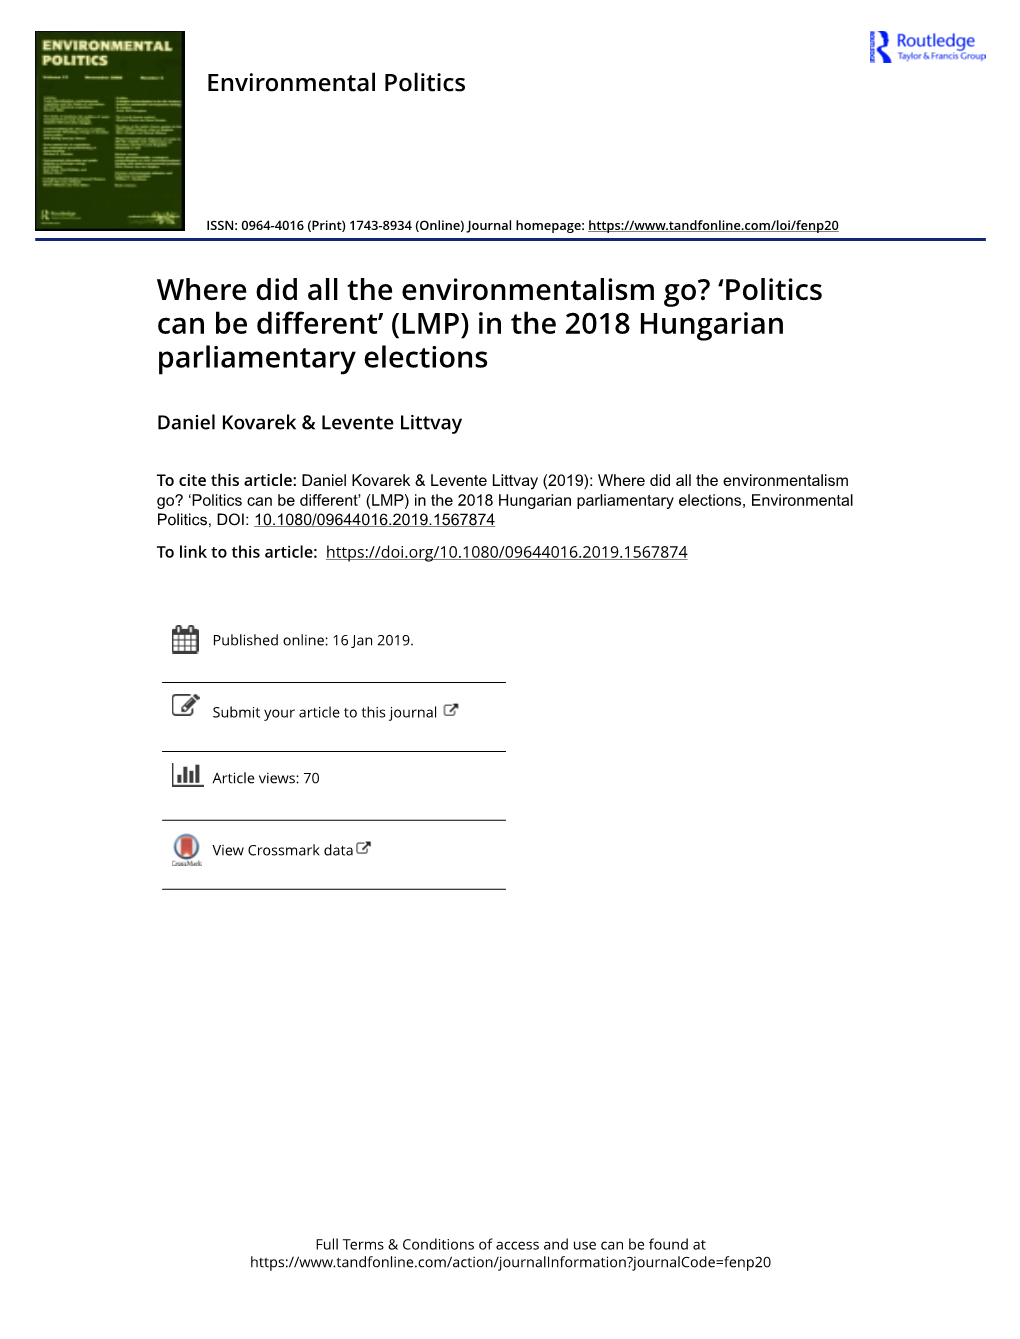 Where Did All the Environmentalism Go? 'Politics Can Be Different' (LMP) in the 2018 Hungarian Parliamentary Elections